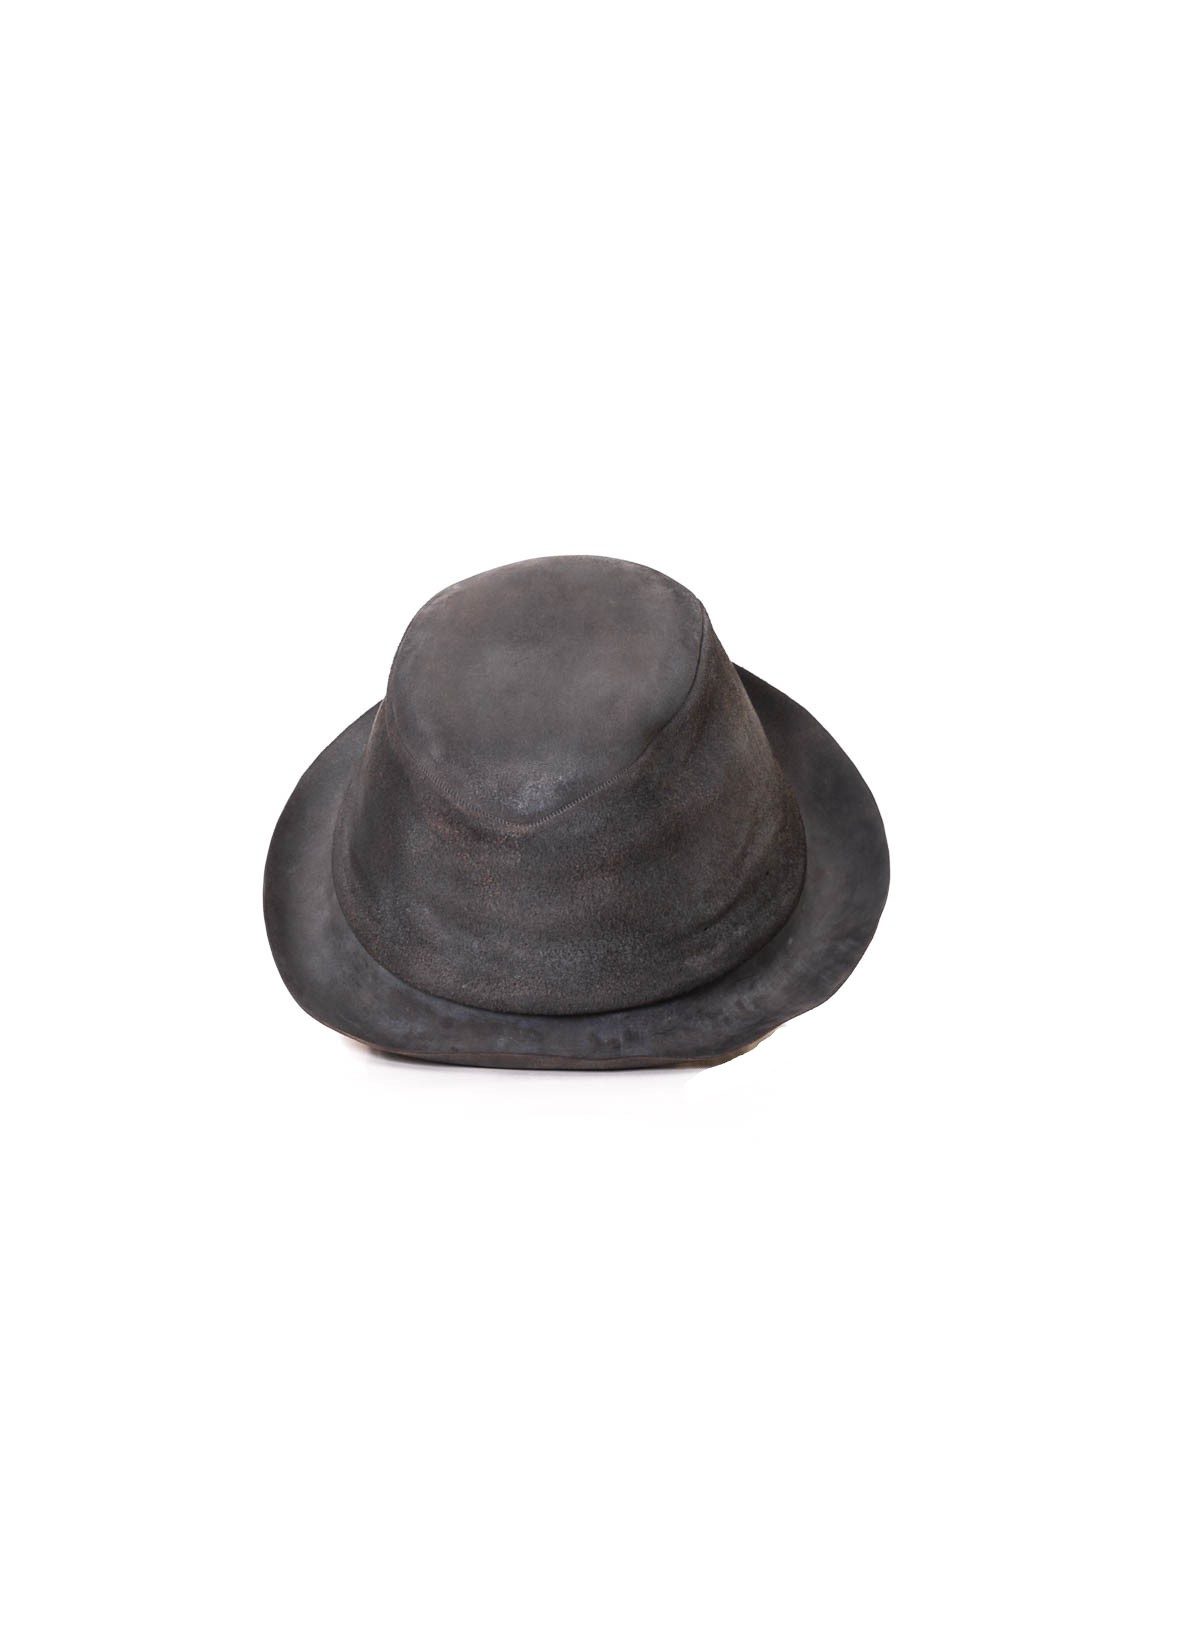 P.R.PATTERSON ／layer 0 HAT